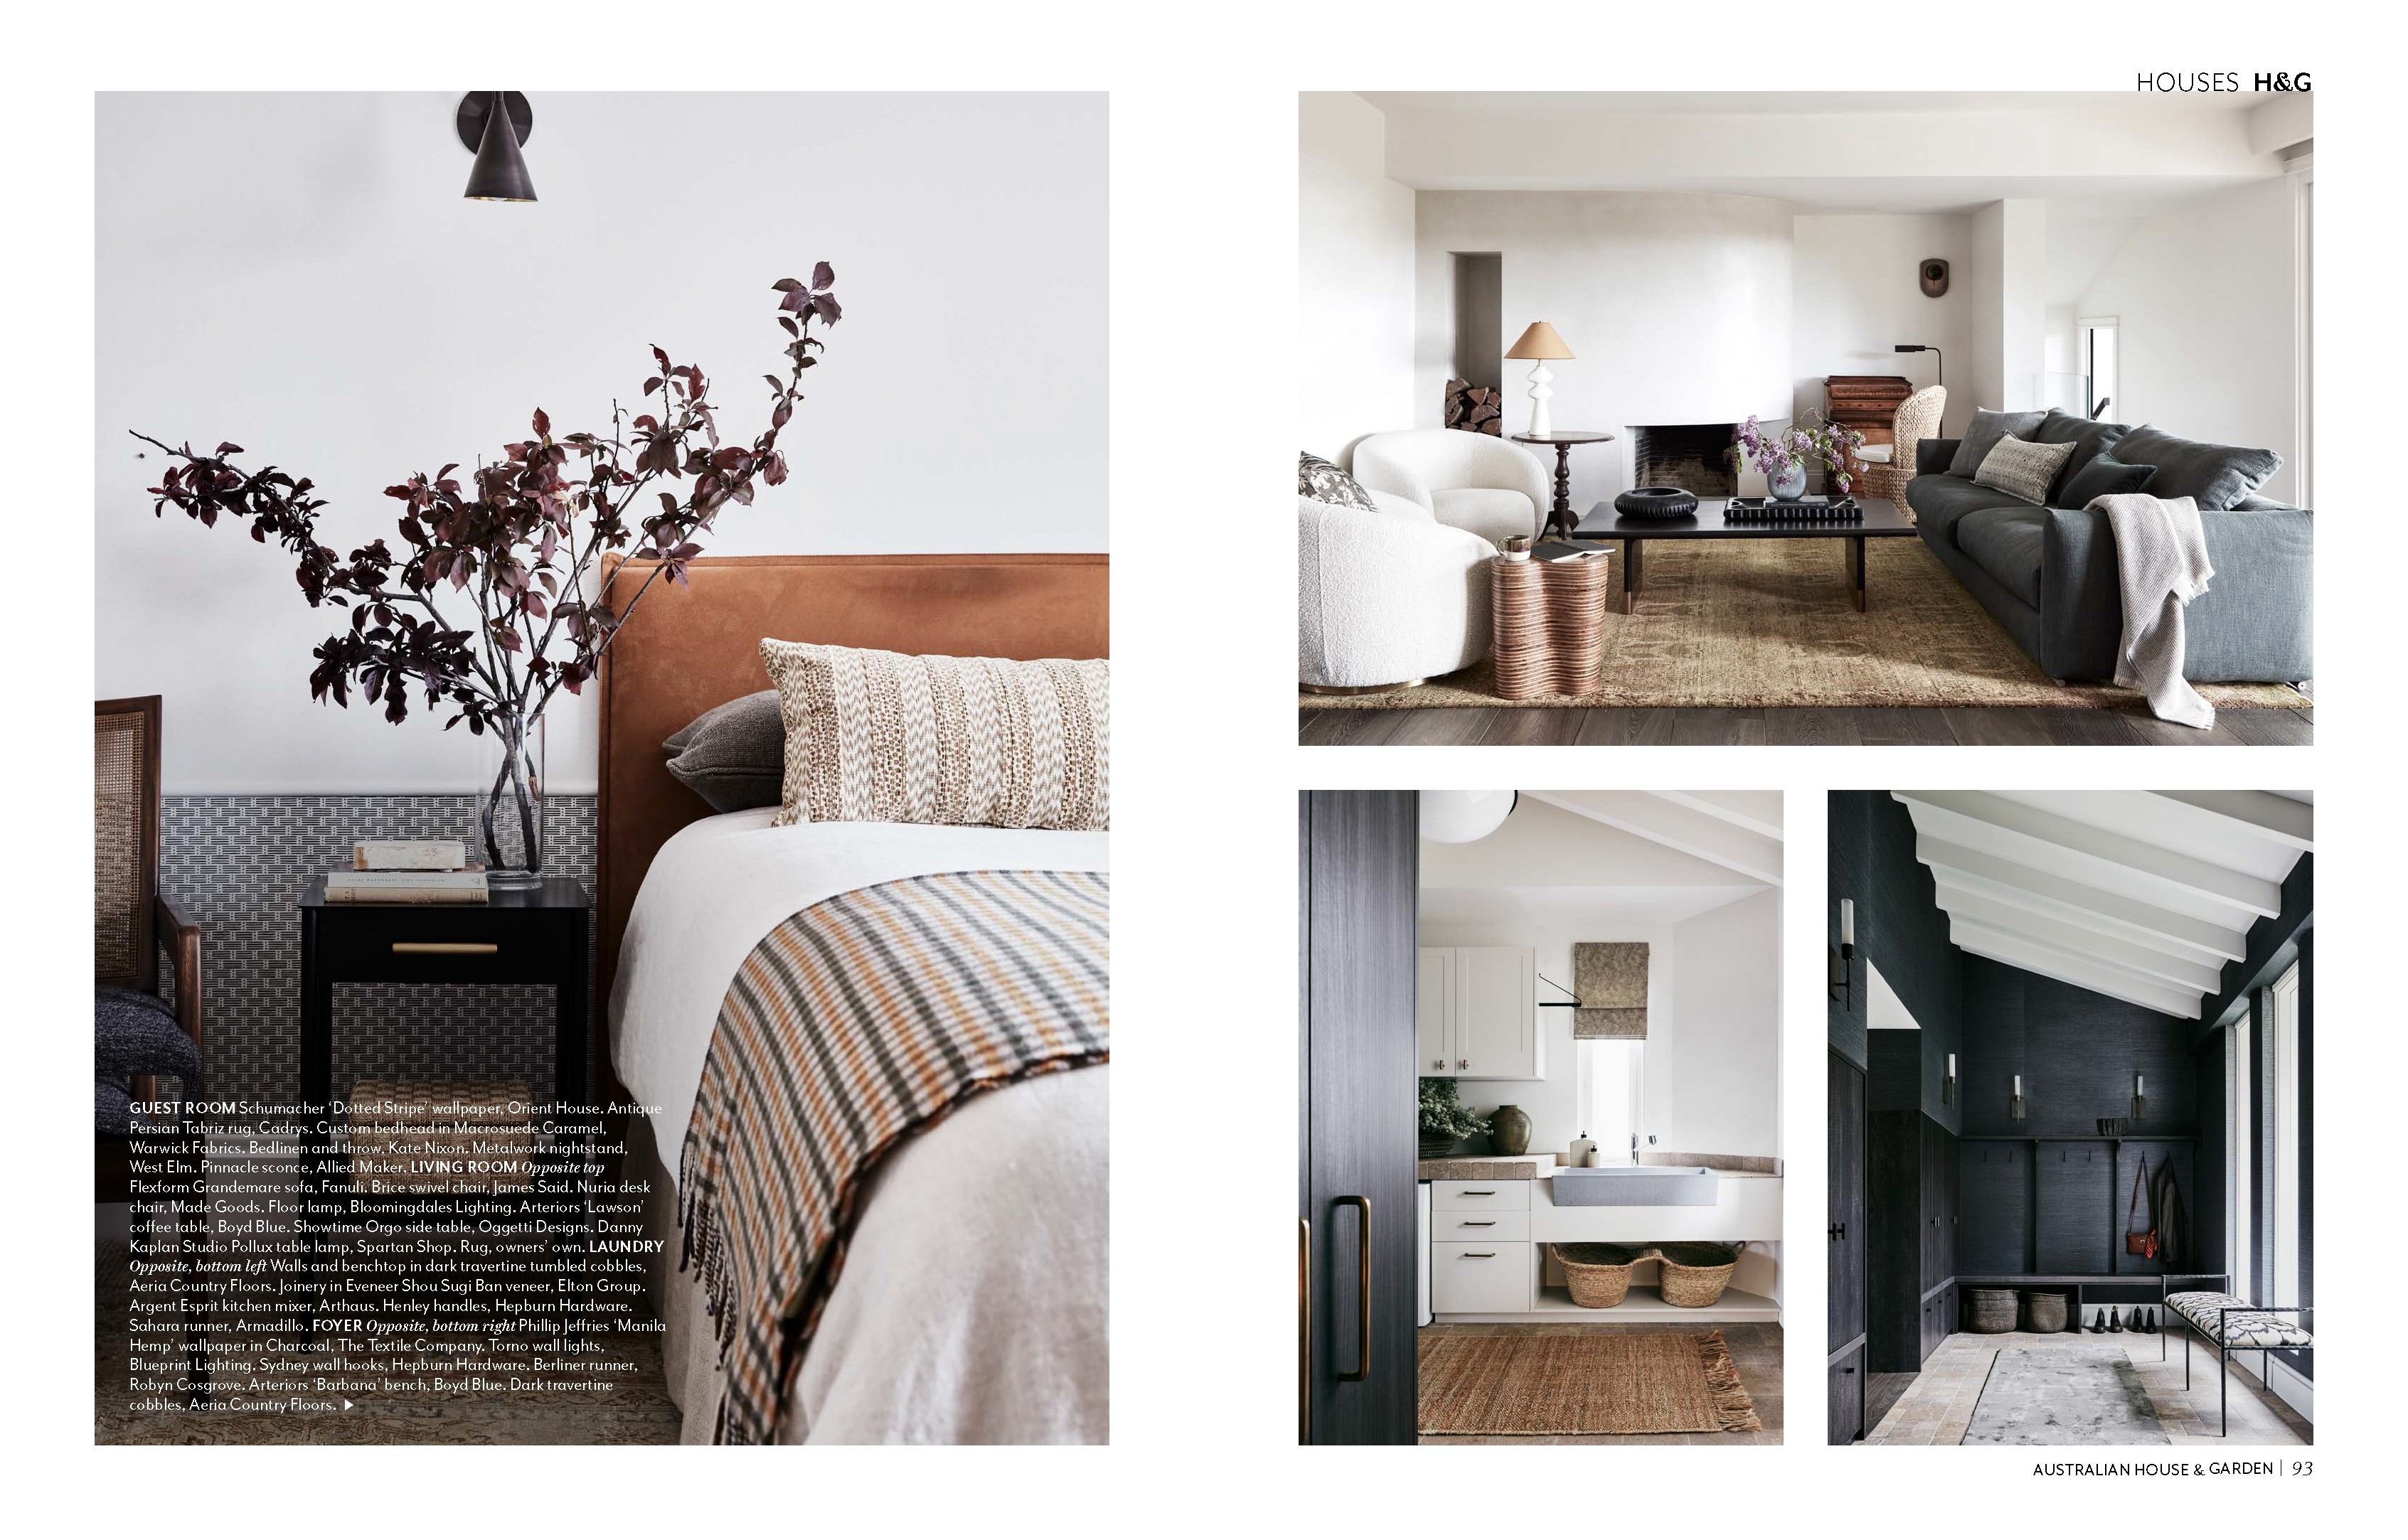 Kate Nixon's Sugarloaf project featured in House and Garden Magazine - Page 9-10